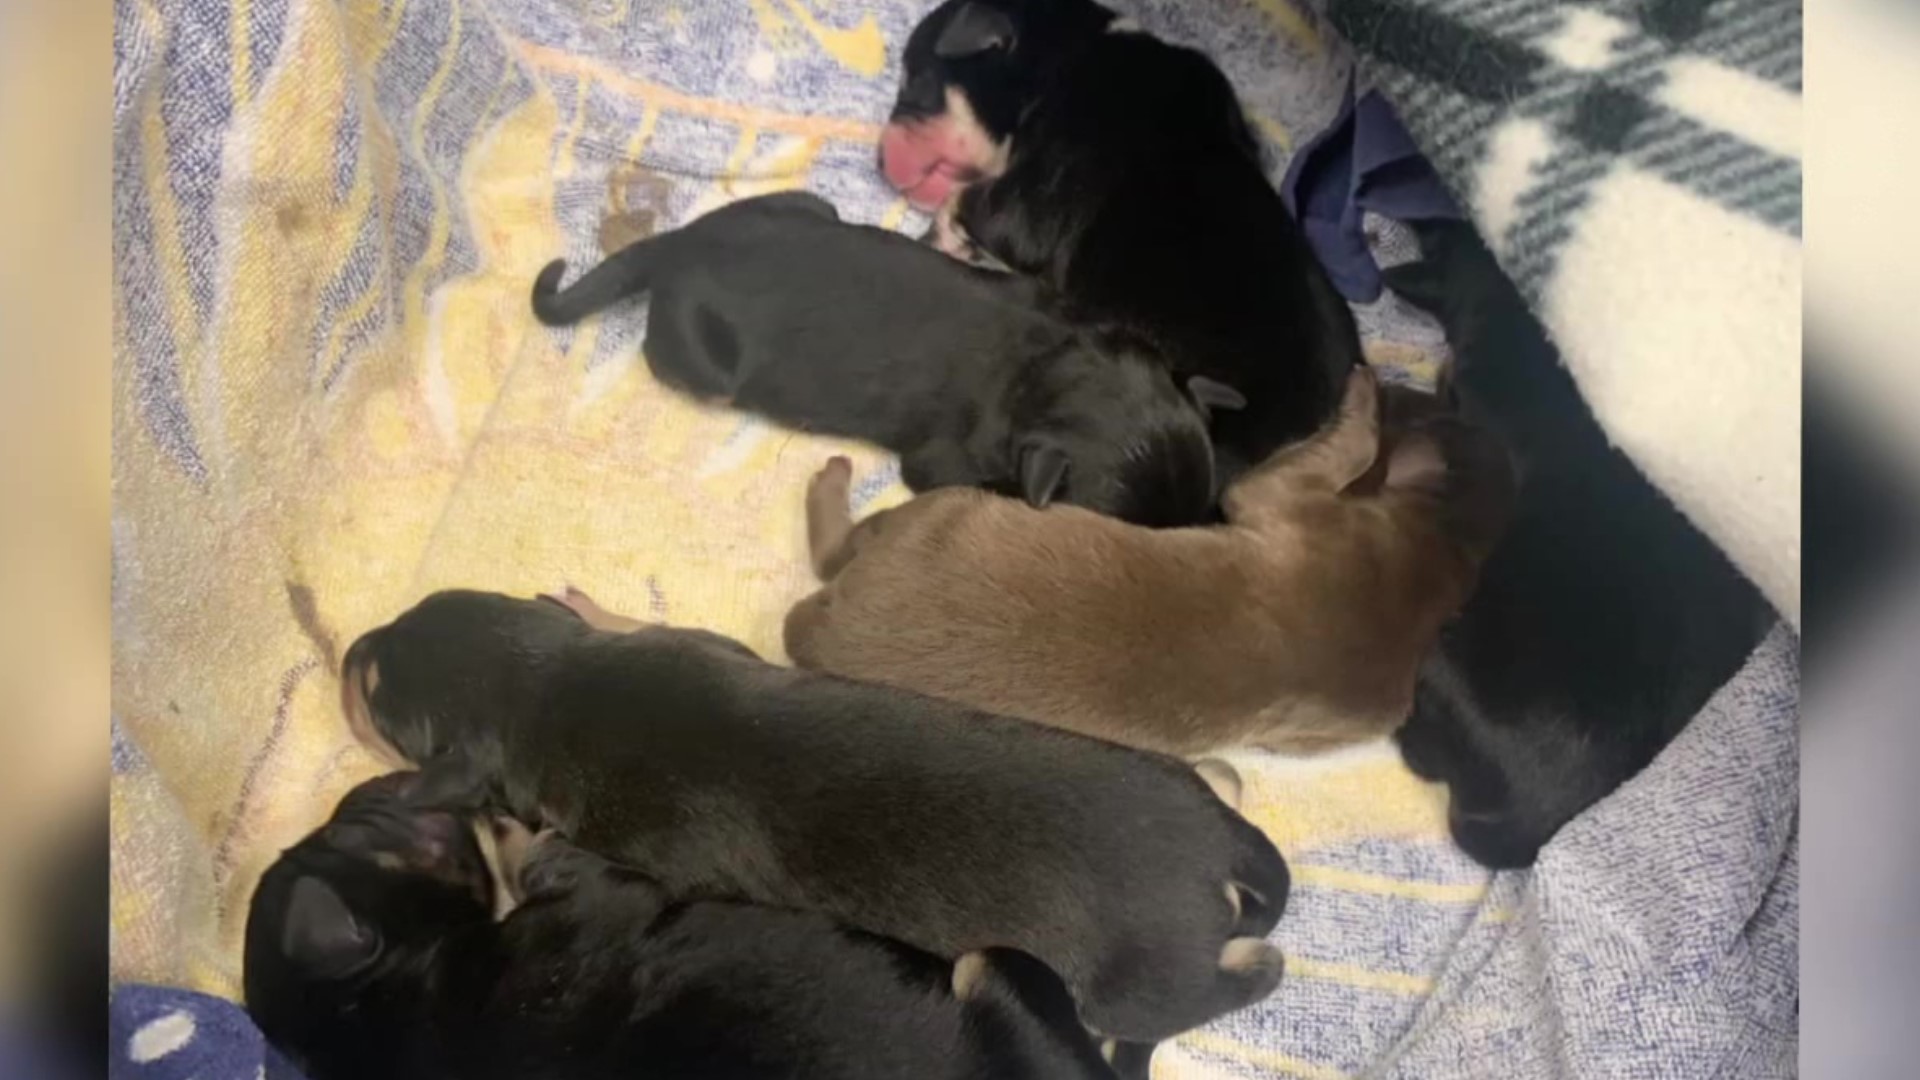 A litter of puppies are now recovering after someone discovered them inside a plastic bag outside the Walmart in Mount Pocono.